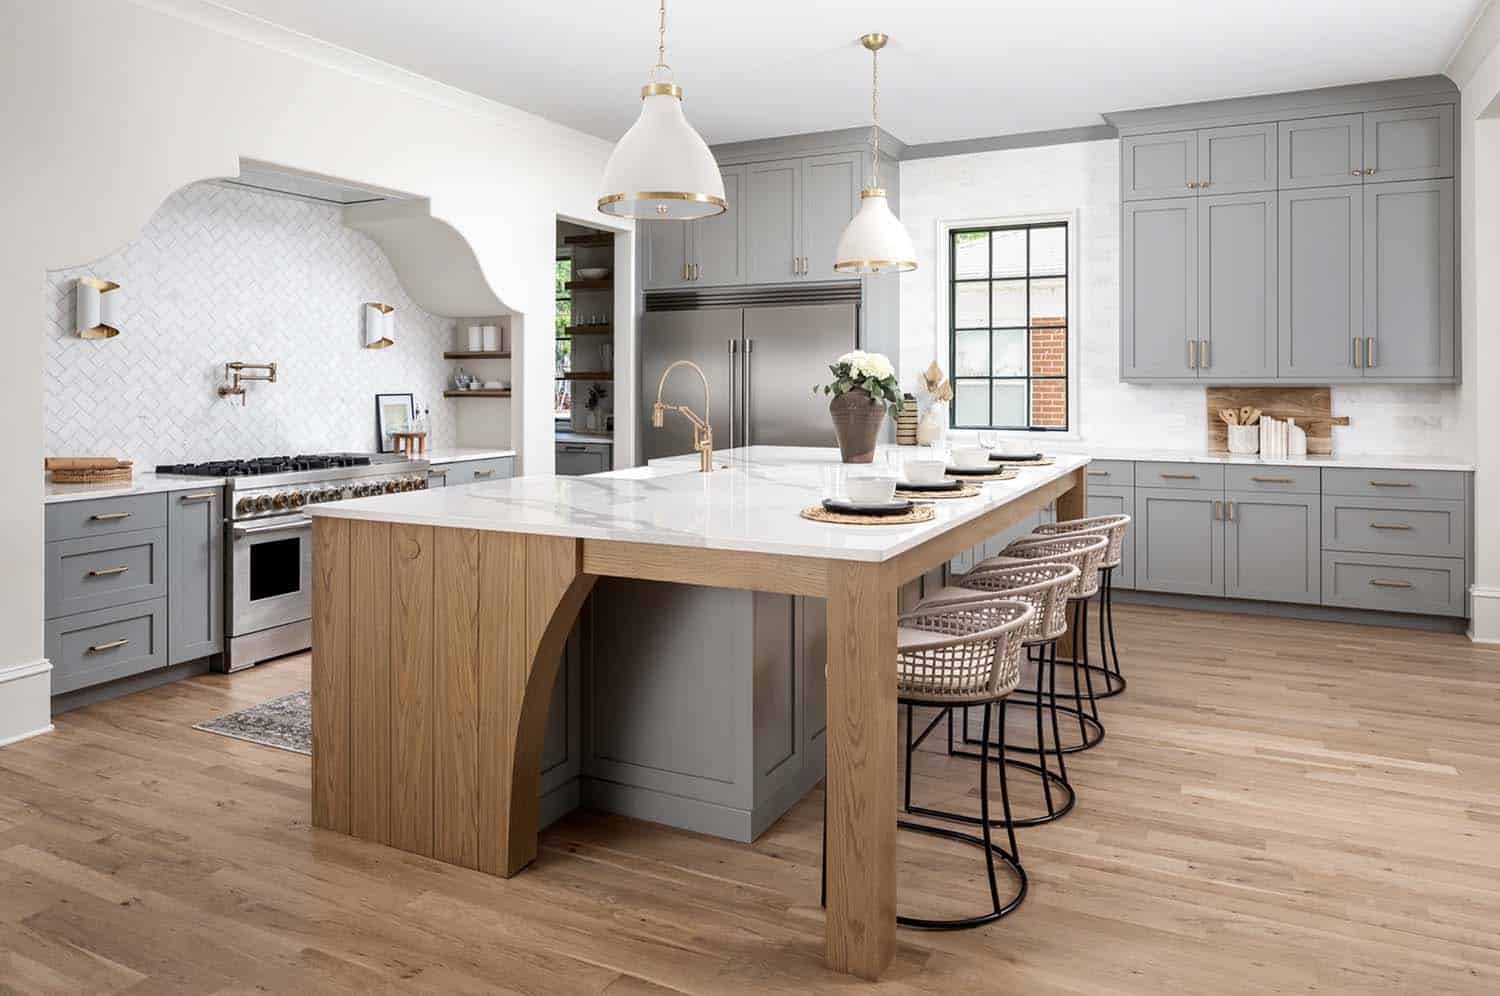 transitional kitchen with gray and wood tone cabinetry on the island